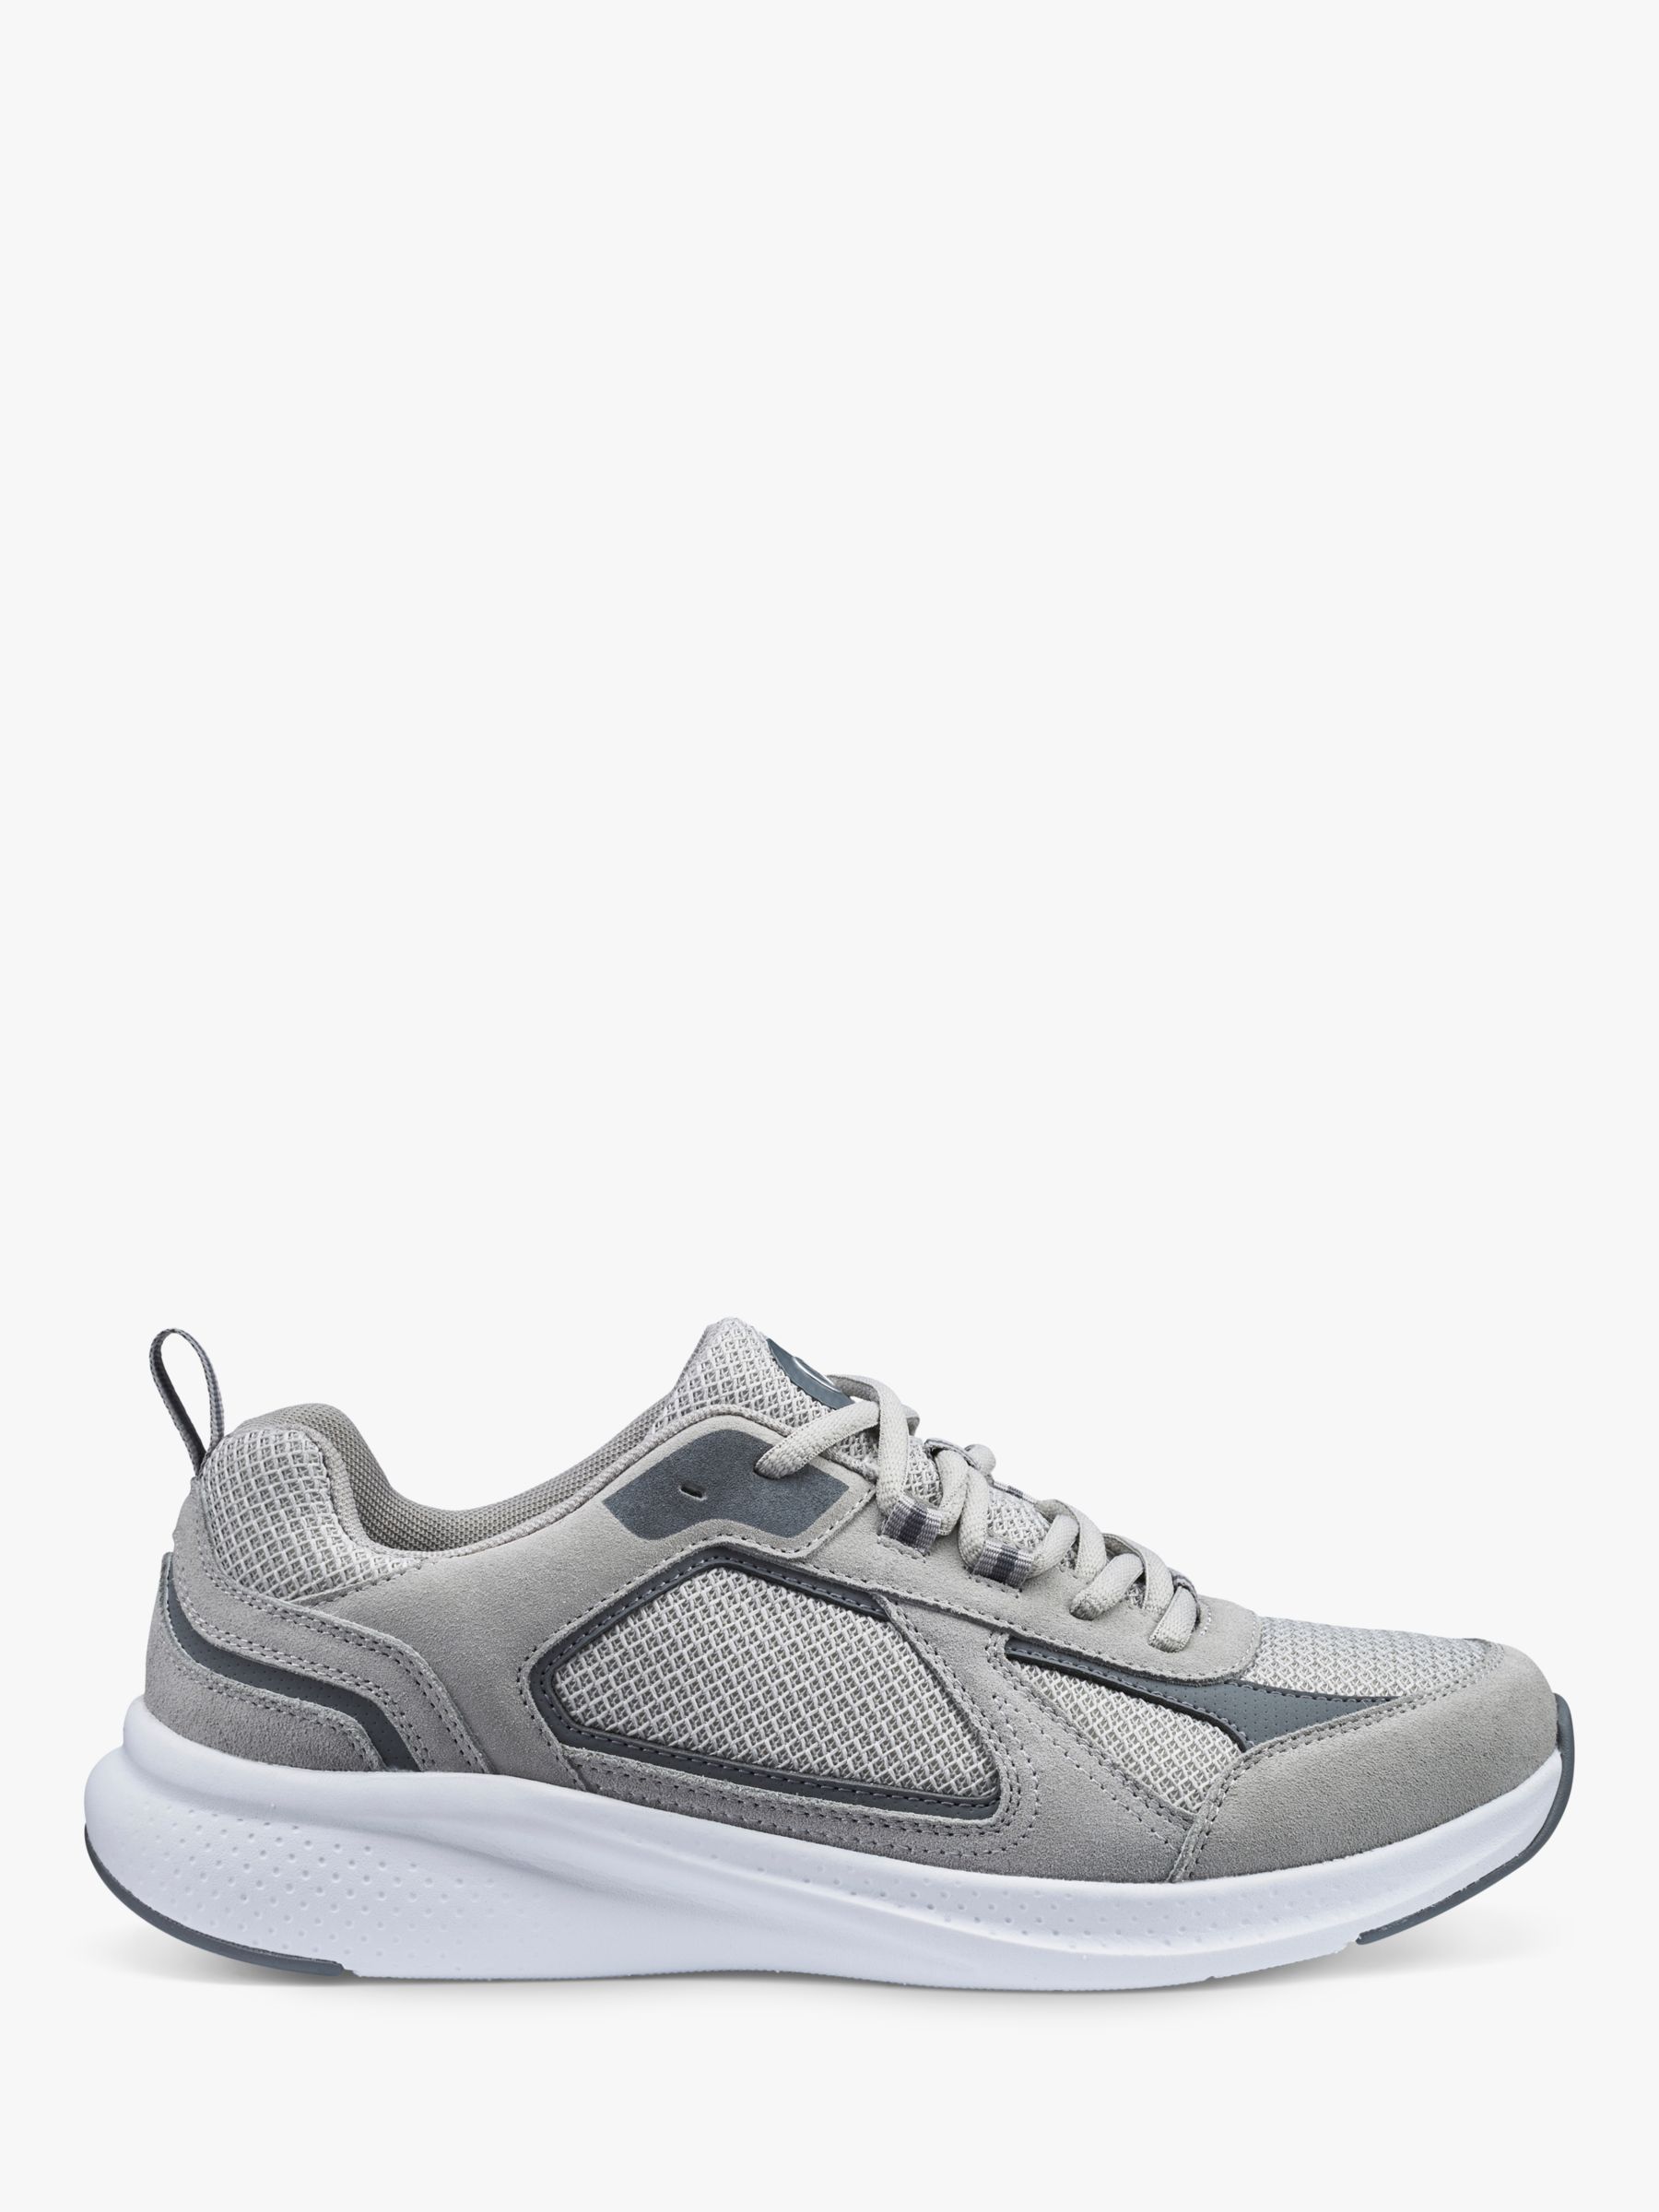 Hotter Success Retro Inspired Trainers, Light Grey, 11